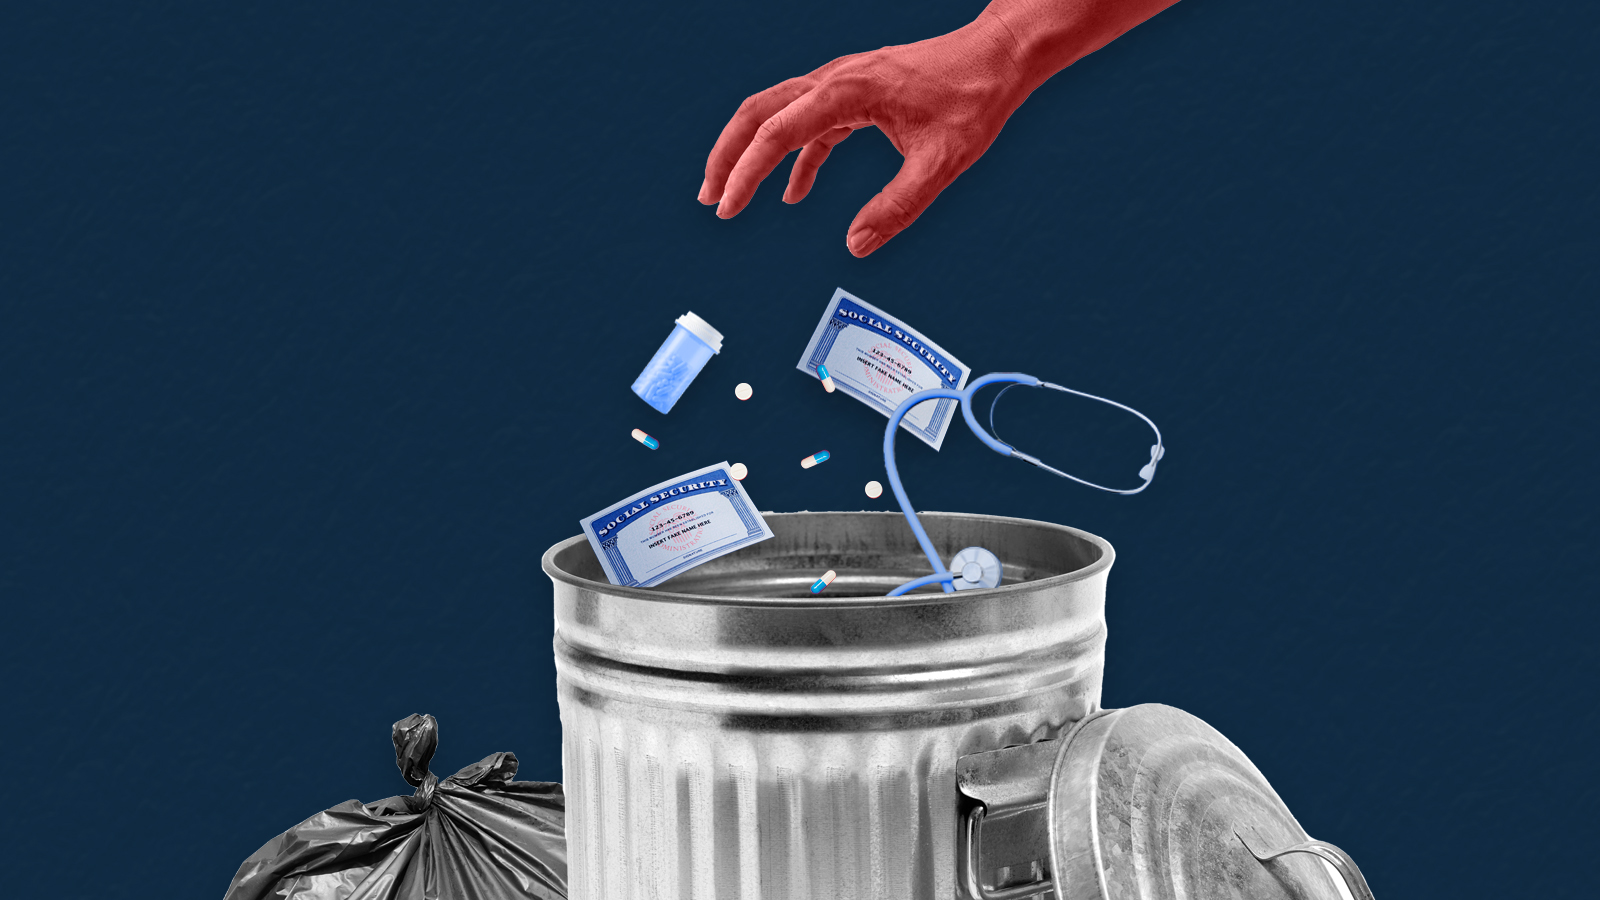 Social Security cards in trash can. 